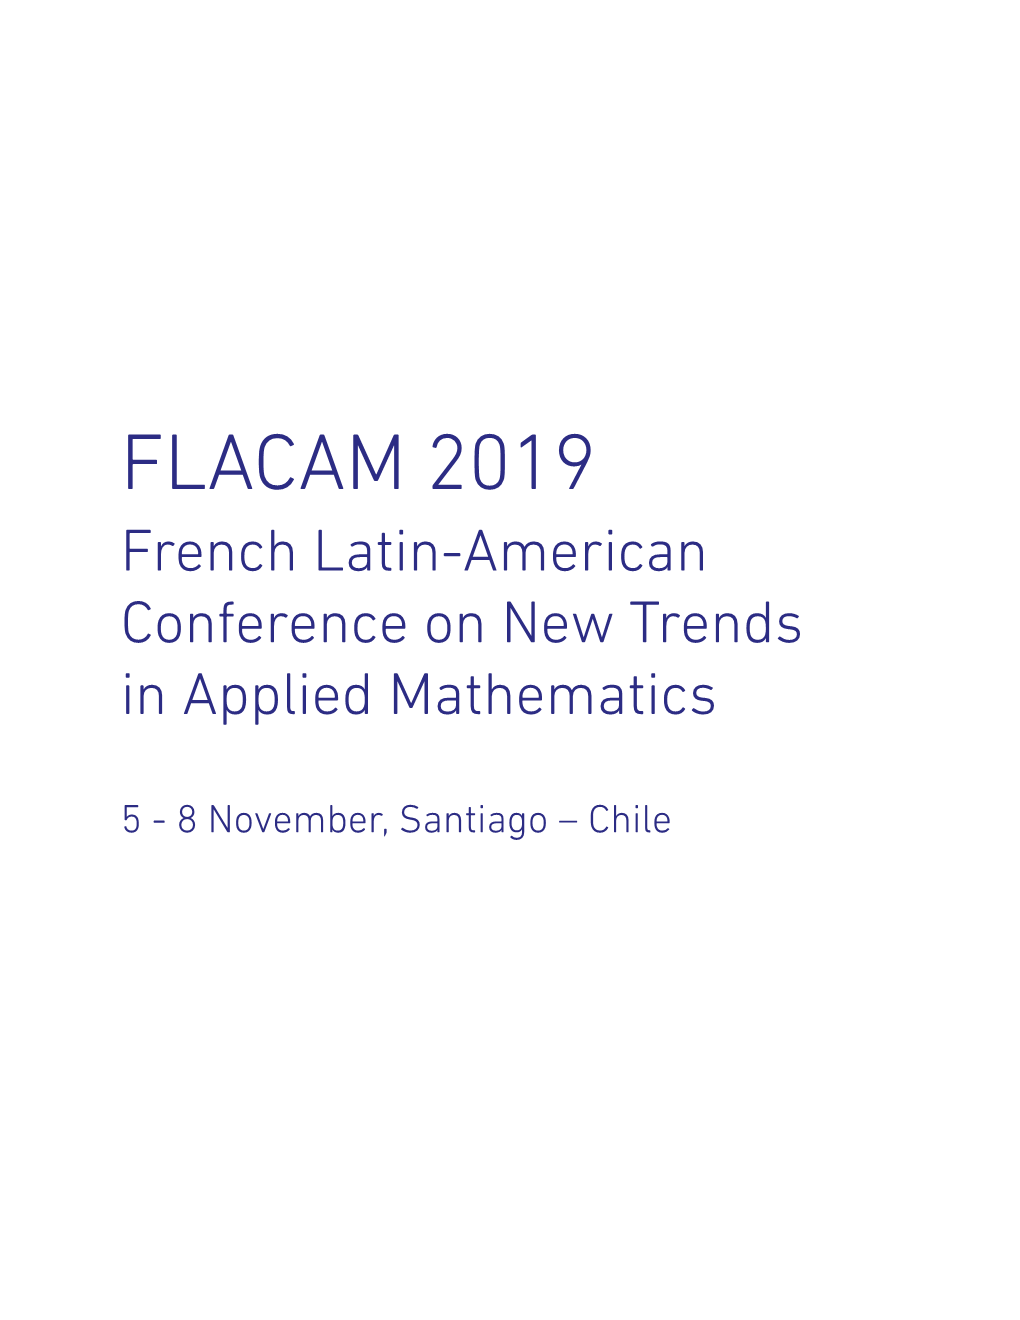 FLACAM 2019 French Latin-American Conference on New Trends in Applied Mathematics